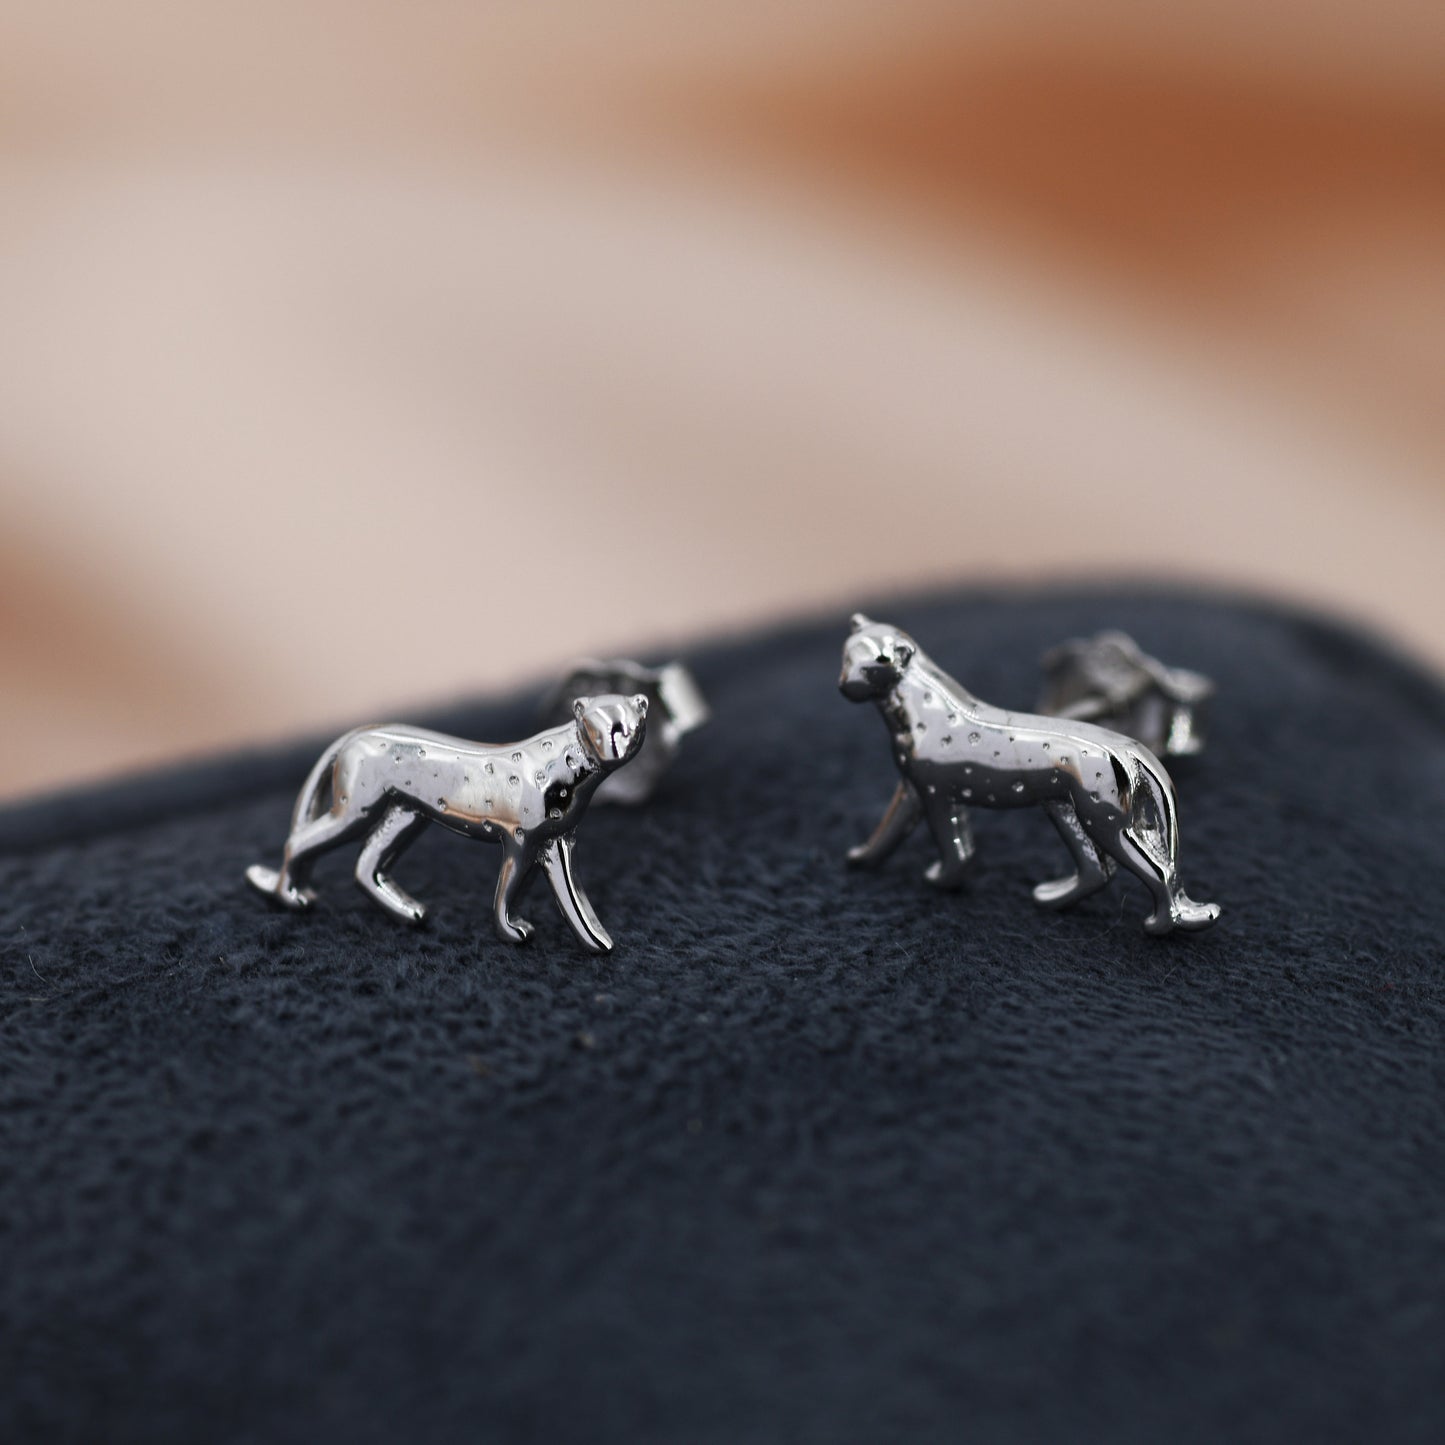 Tiny Leopard Stud Earrings in Sterling Silver, Silver or Gold, Jaguar Stacking Earrings,  Nature Inspired Animal Earrings